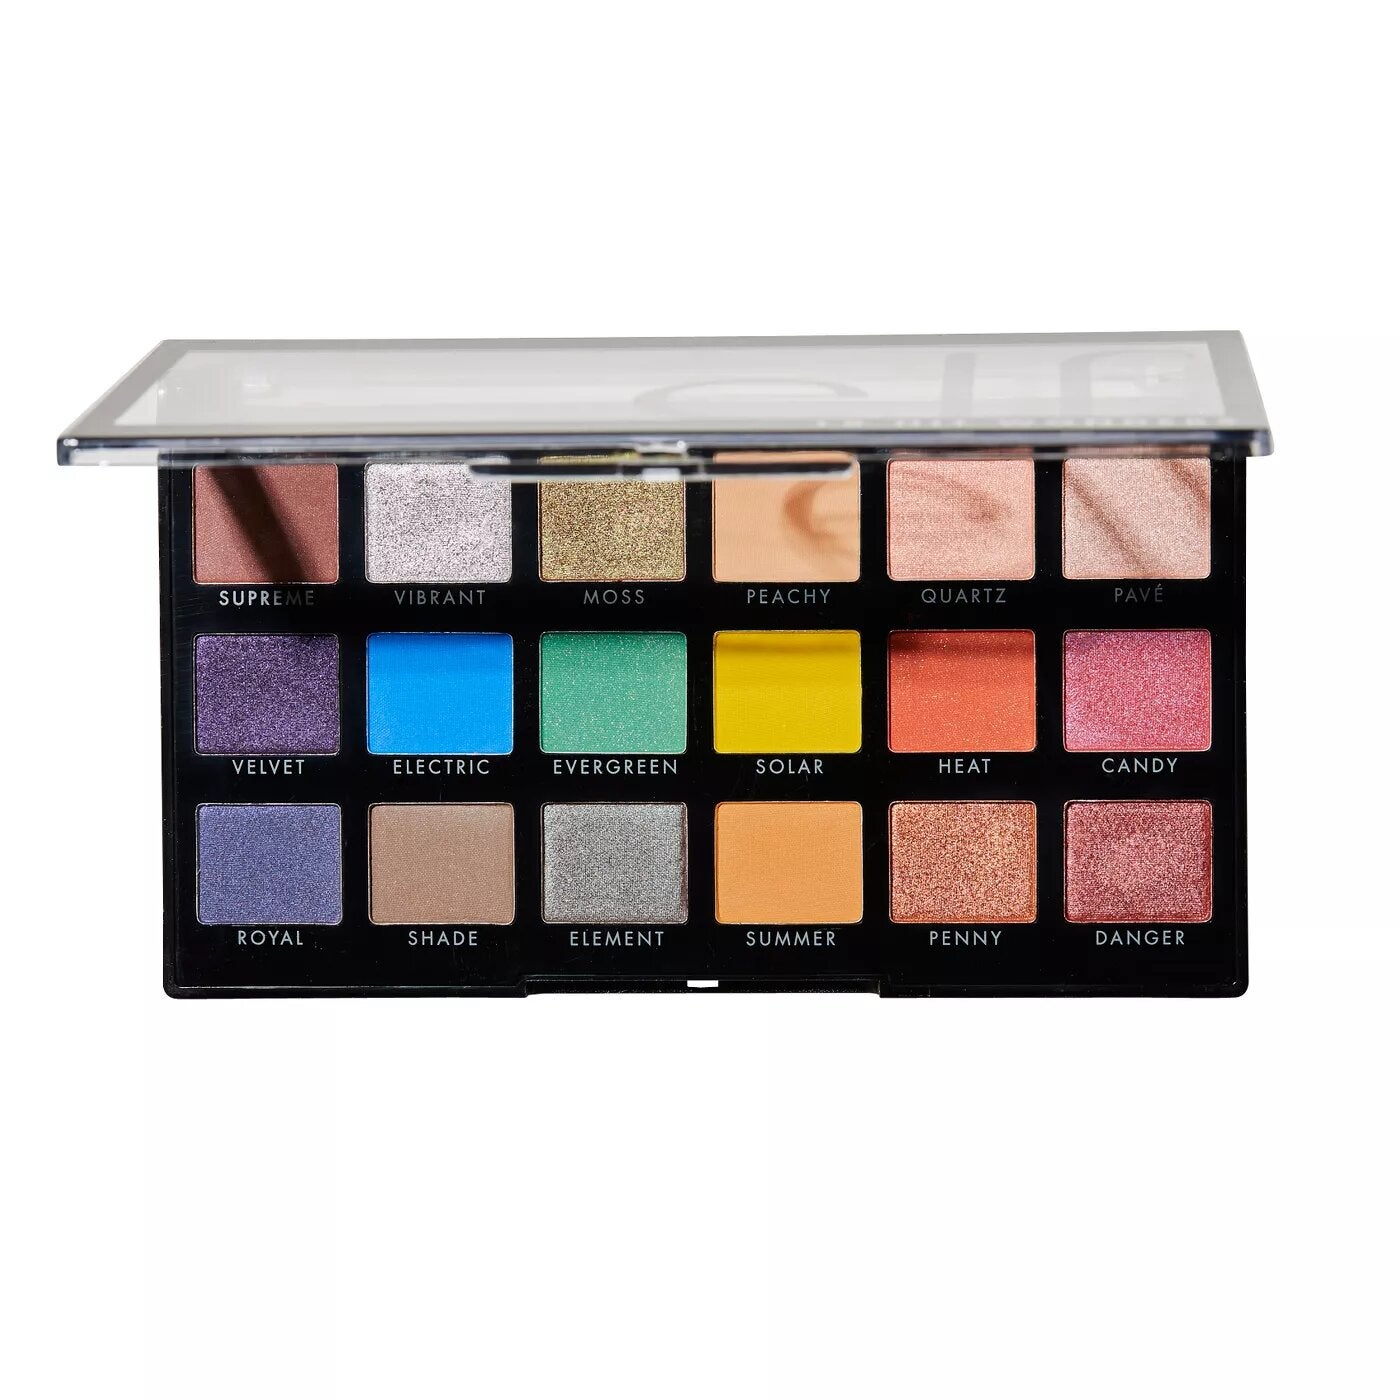 8 Colorful Eyeshadow Palettes | Oye! Times